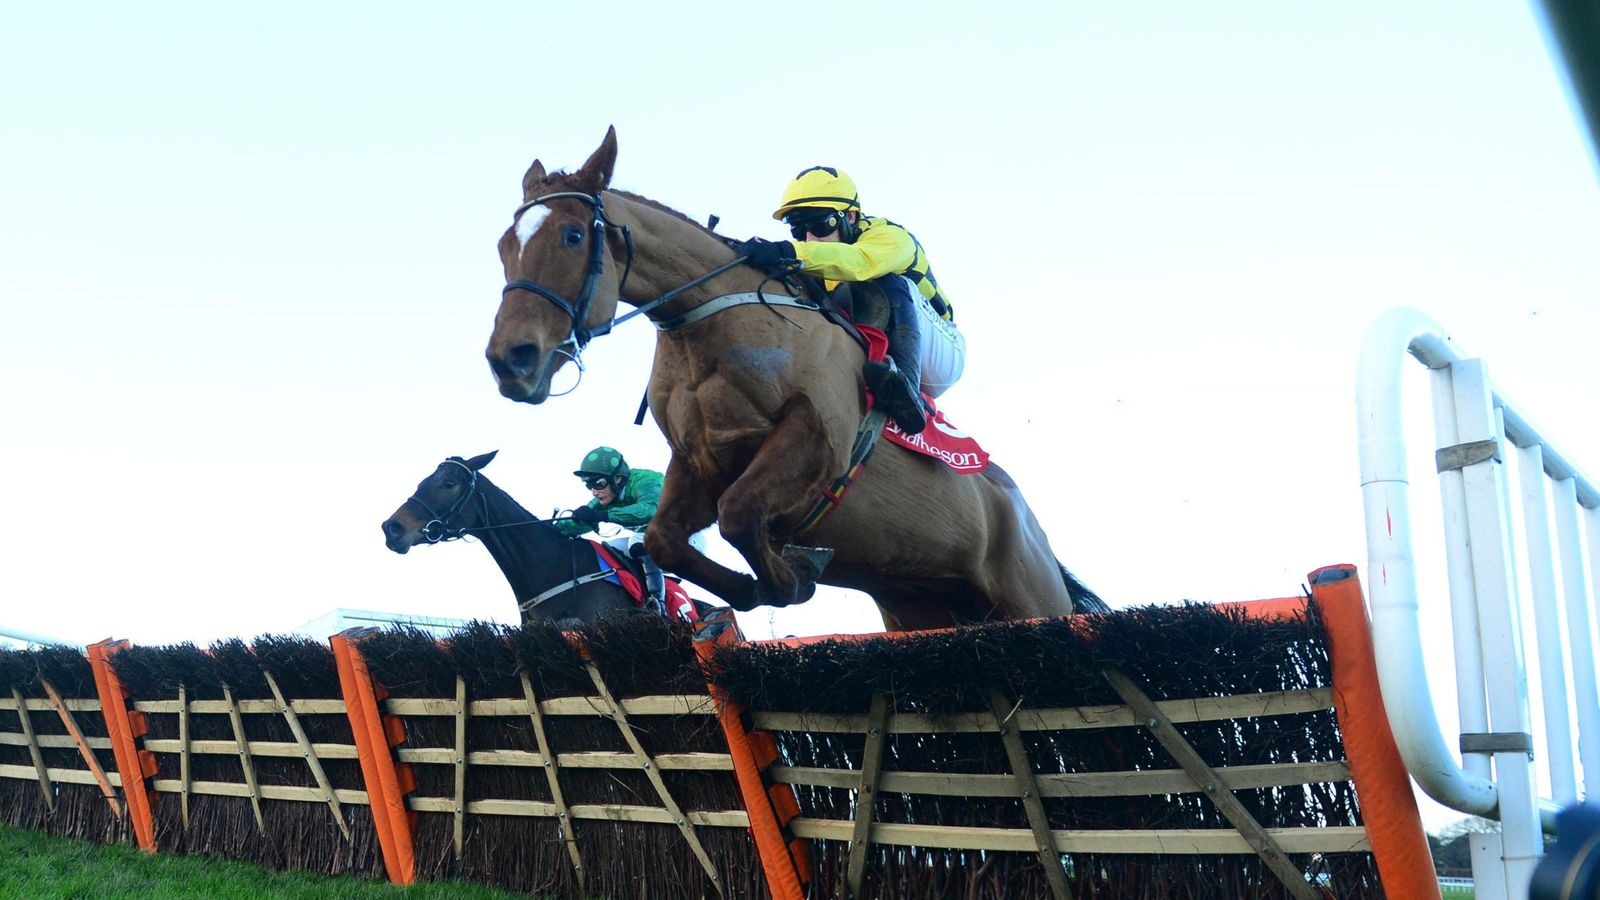 Matheson Hurdle: State Man strikes again in Leopardstown feature to ...